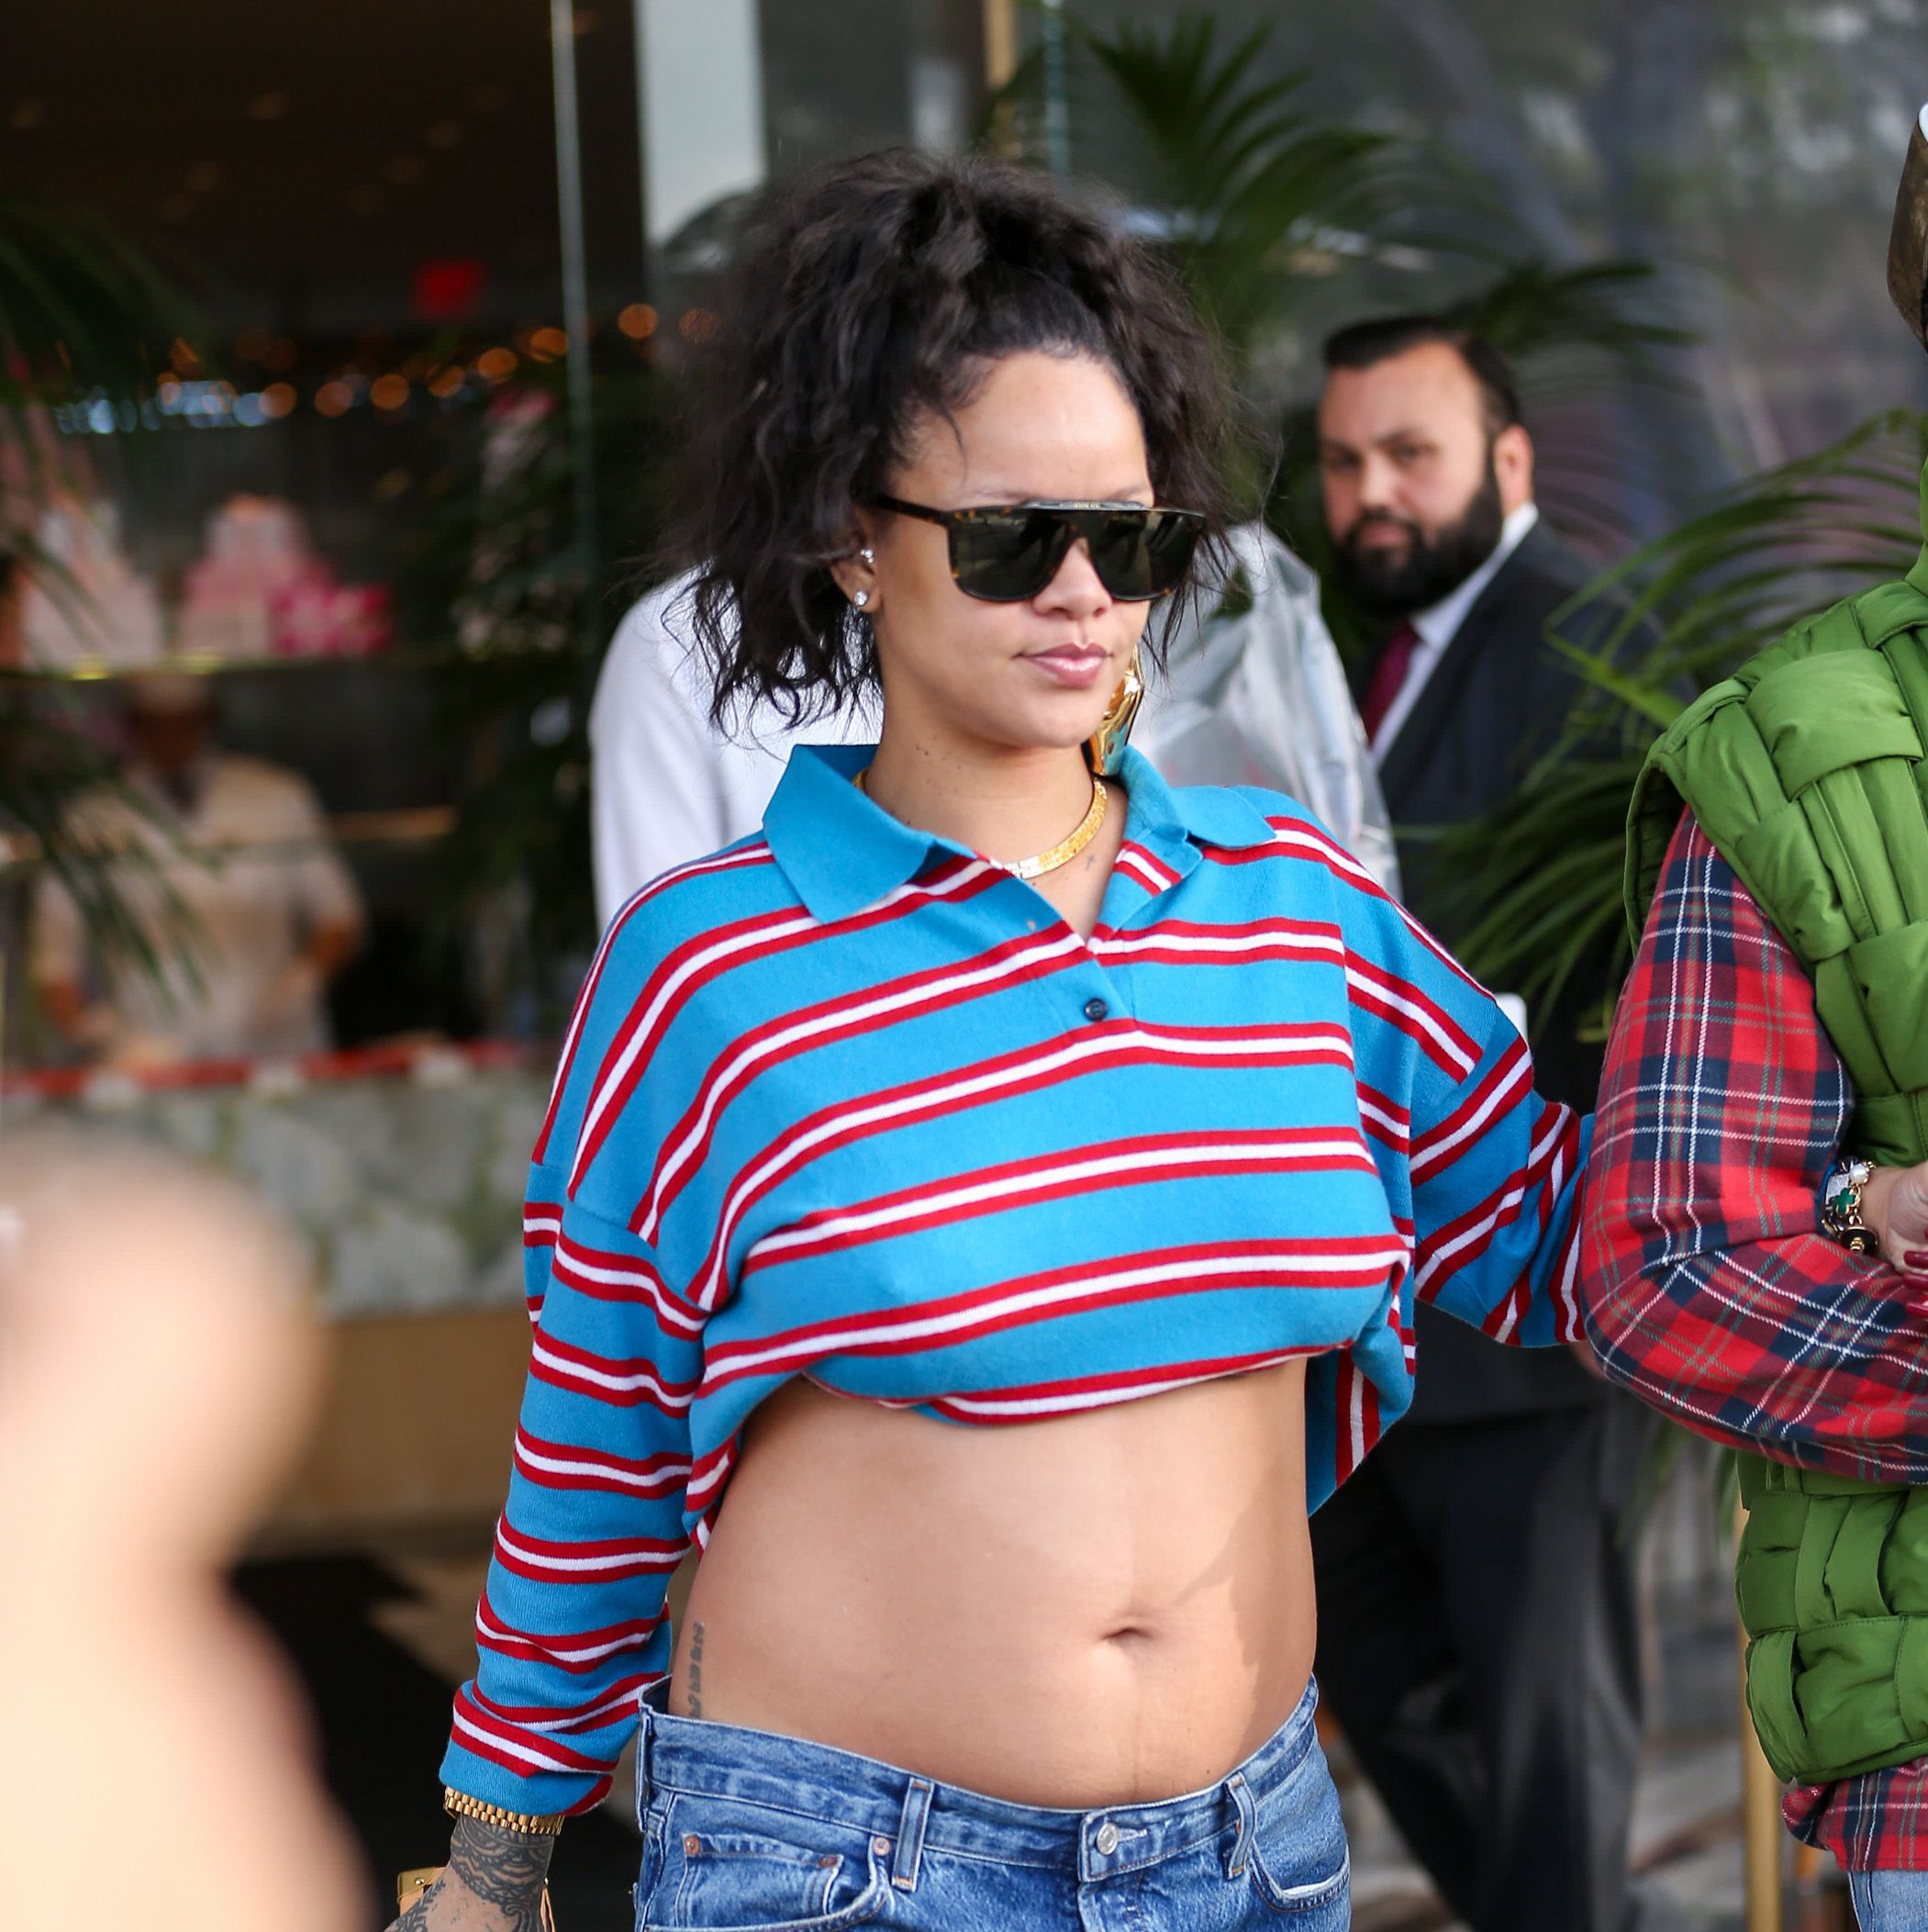 Rihanna is sharing more about her second pregnancy after keeping her first relatively private.